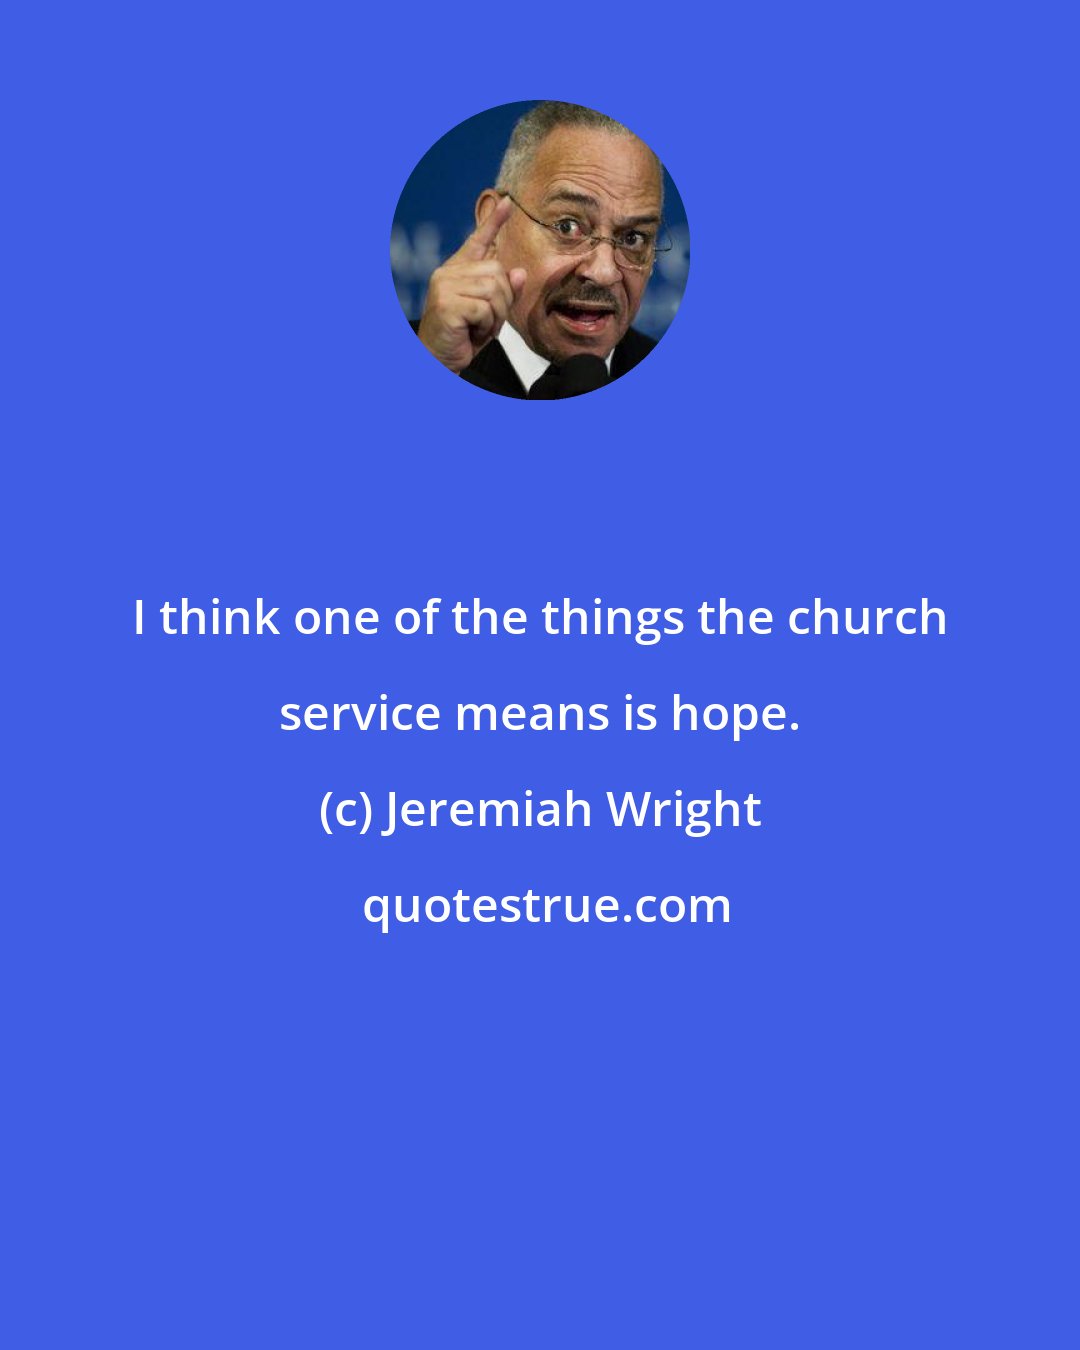 Jeremiah Wright: I think one of the things the church service means is hope.